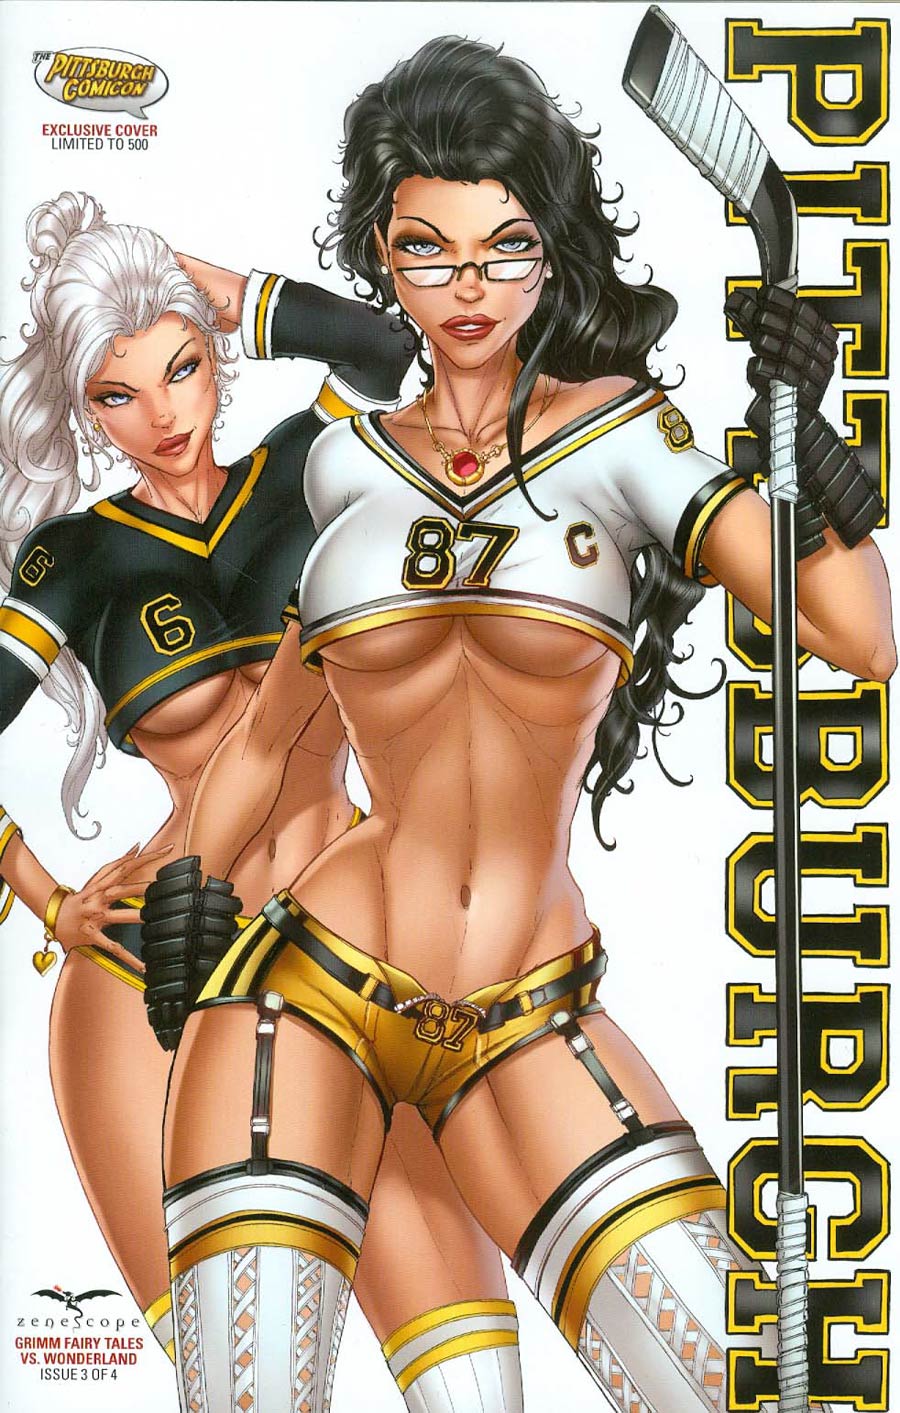 Grimm Fairy Tales vs Wonderland #3 Cover D Pittsburgh Comicon Exclusive Jamie Tyndall Jersey Variant Cover